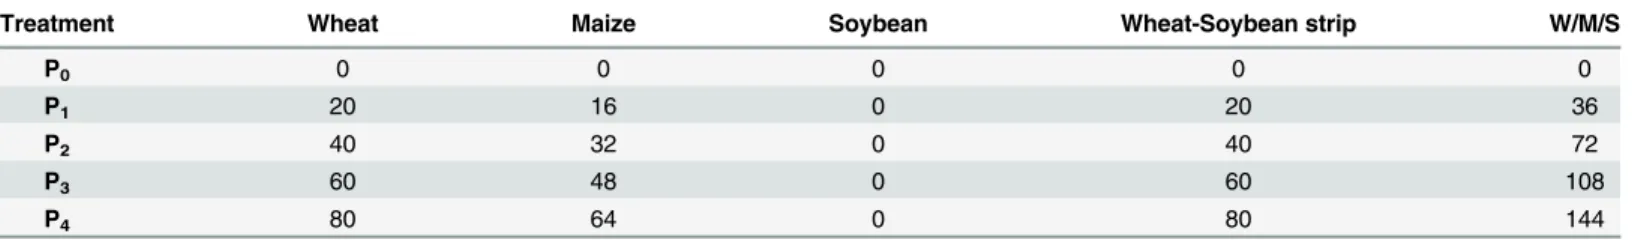 Table 2. P application rates for wheat, maize and soybean in the W/M/S system (kg P ha -1 year -1 ).